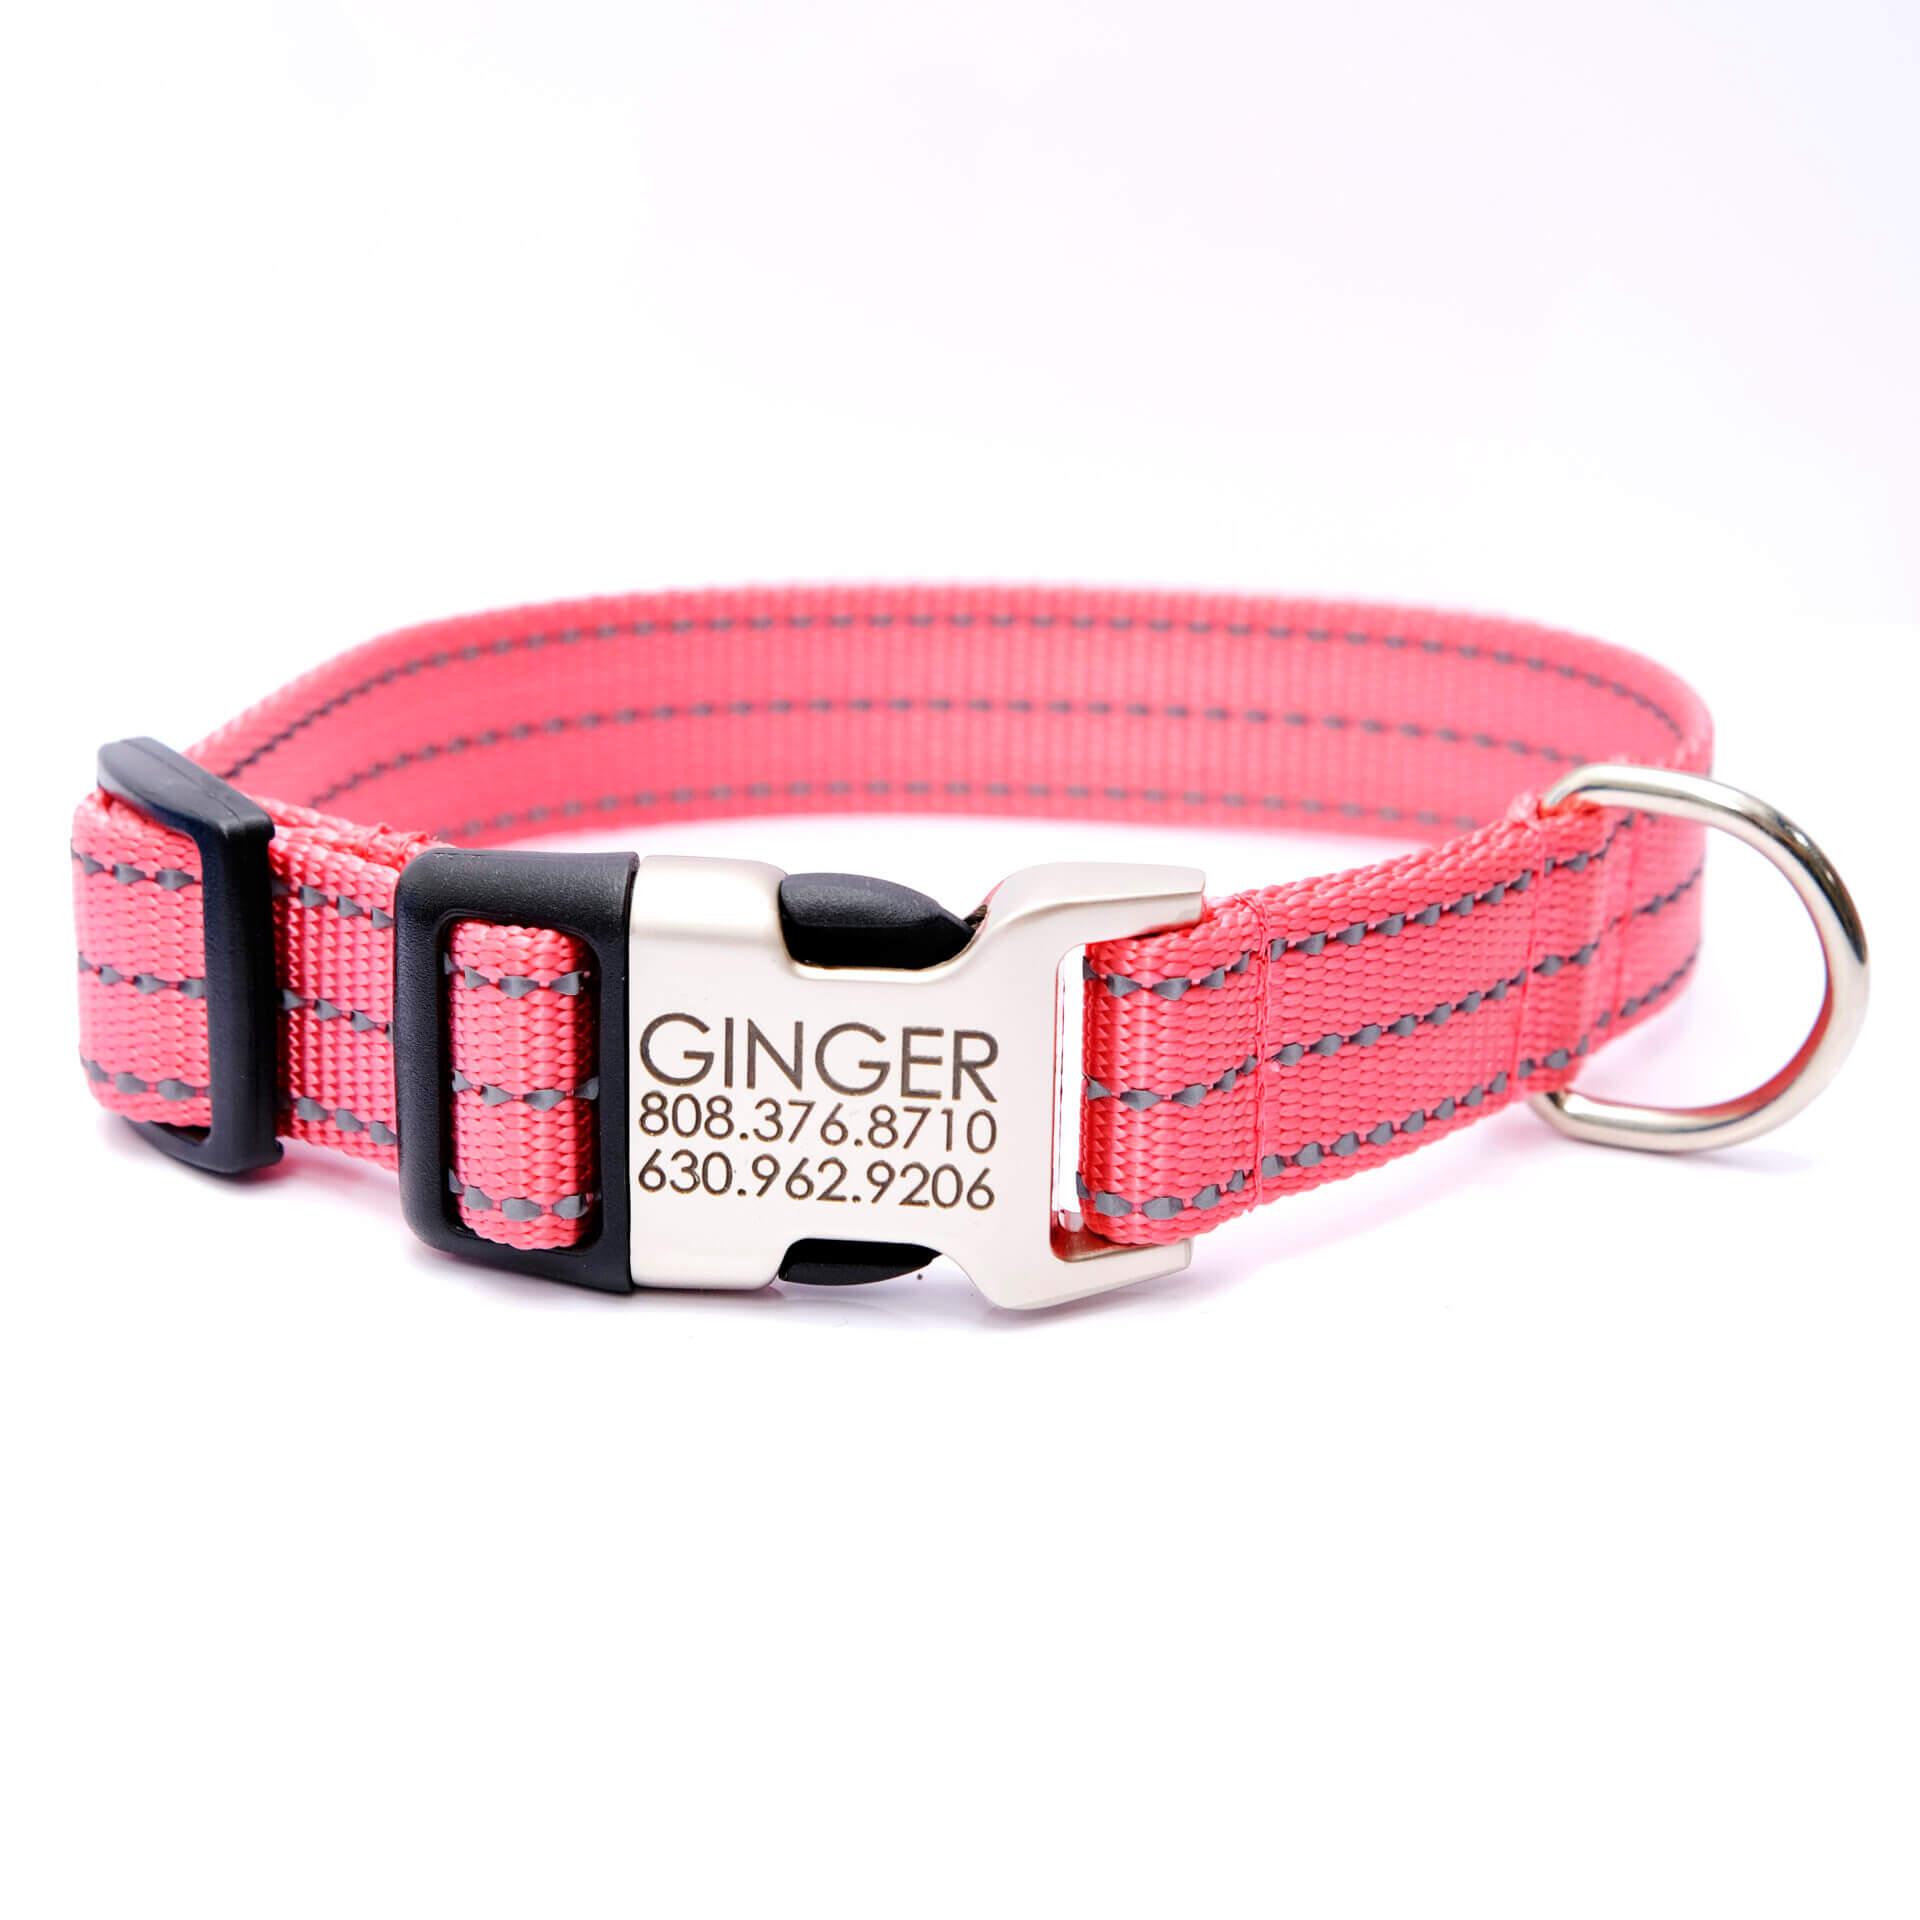 Personalized Dog Collar with Laser Engraved Metal Buckles